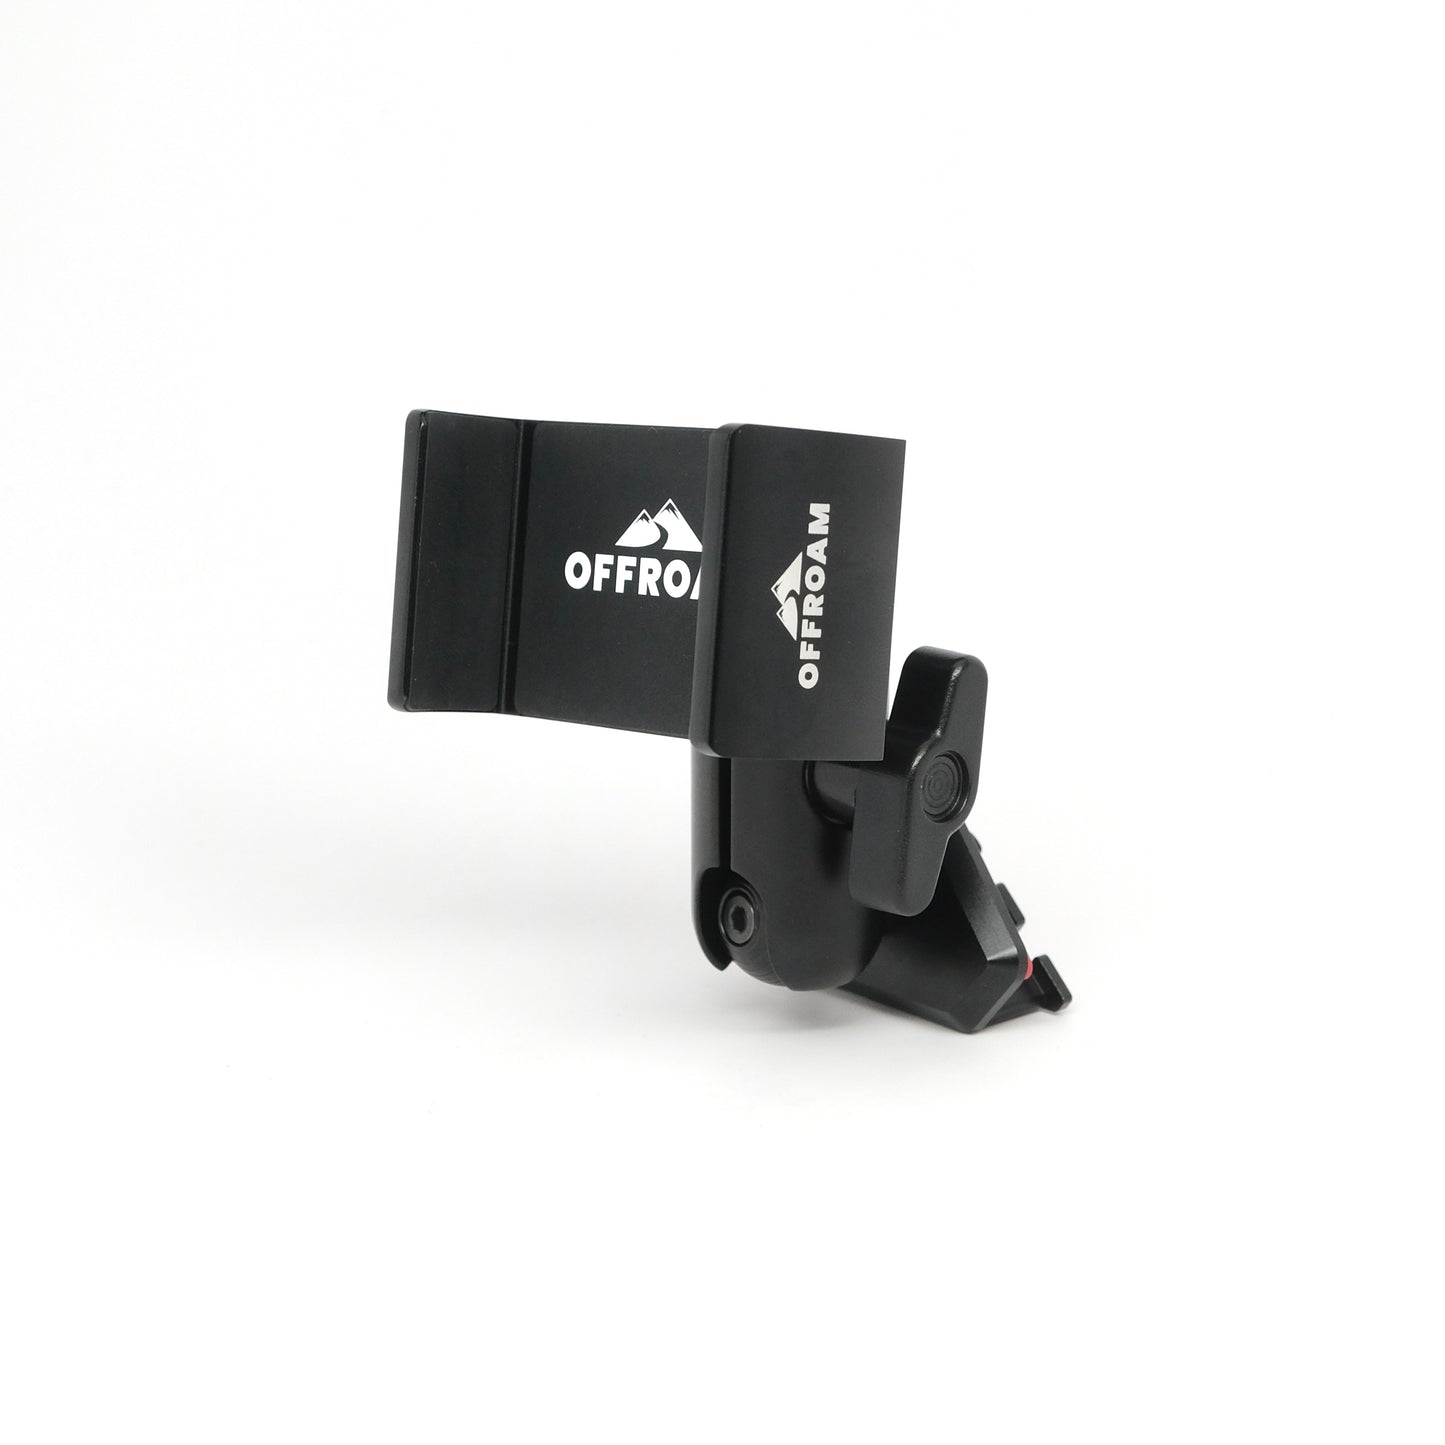 Toyota Tacoma 2005-2011 Phone Mount for off roading universal hold